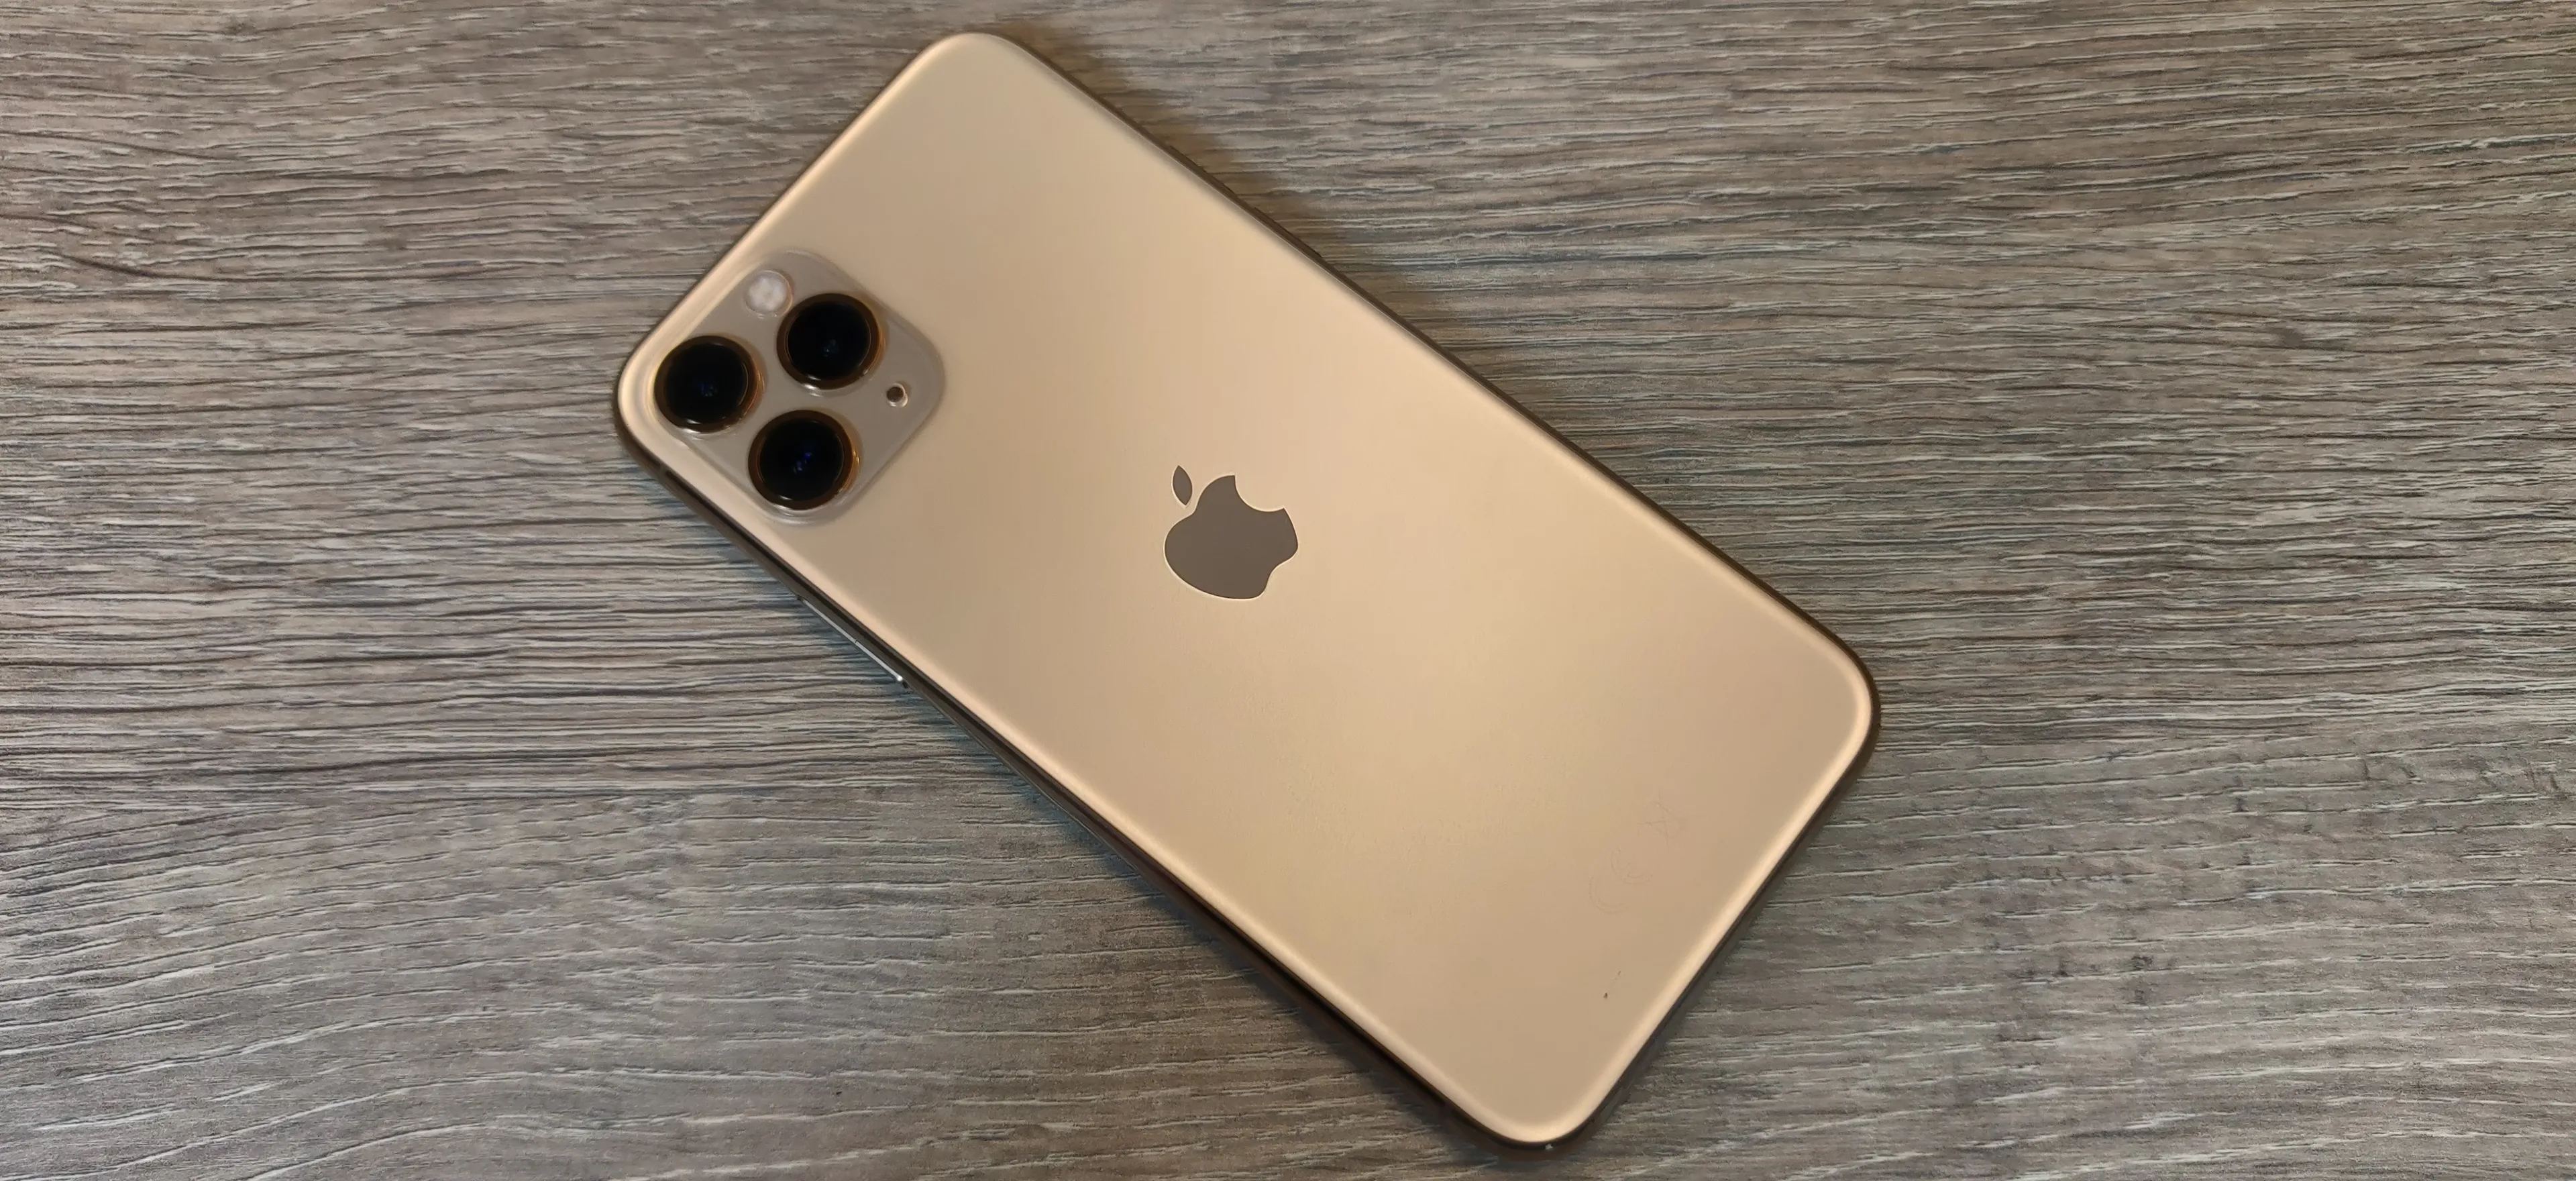 iphone 11 pro review 2f1570014570